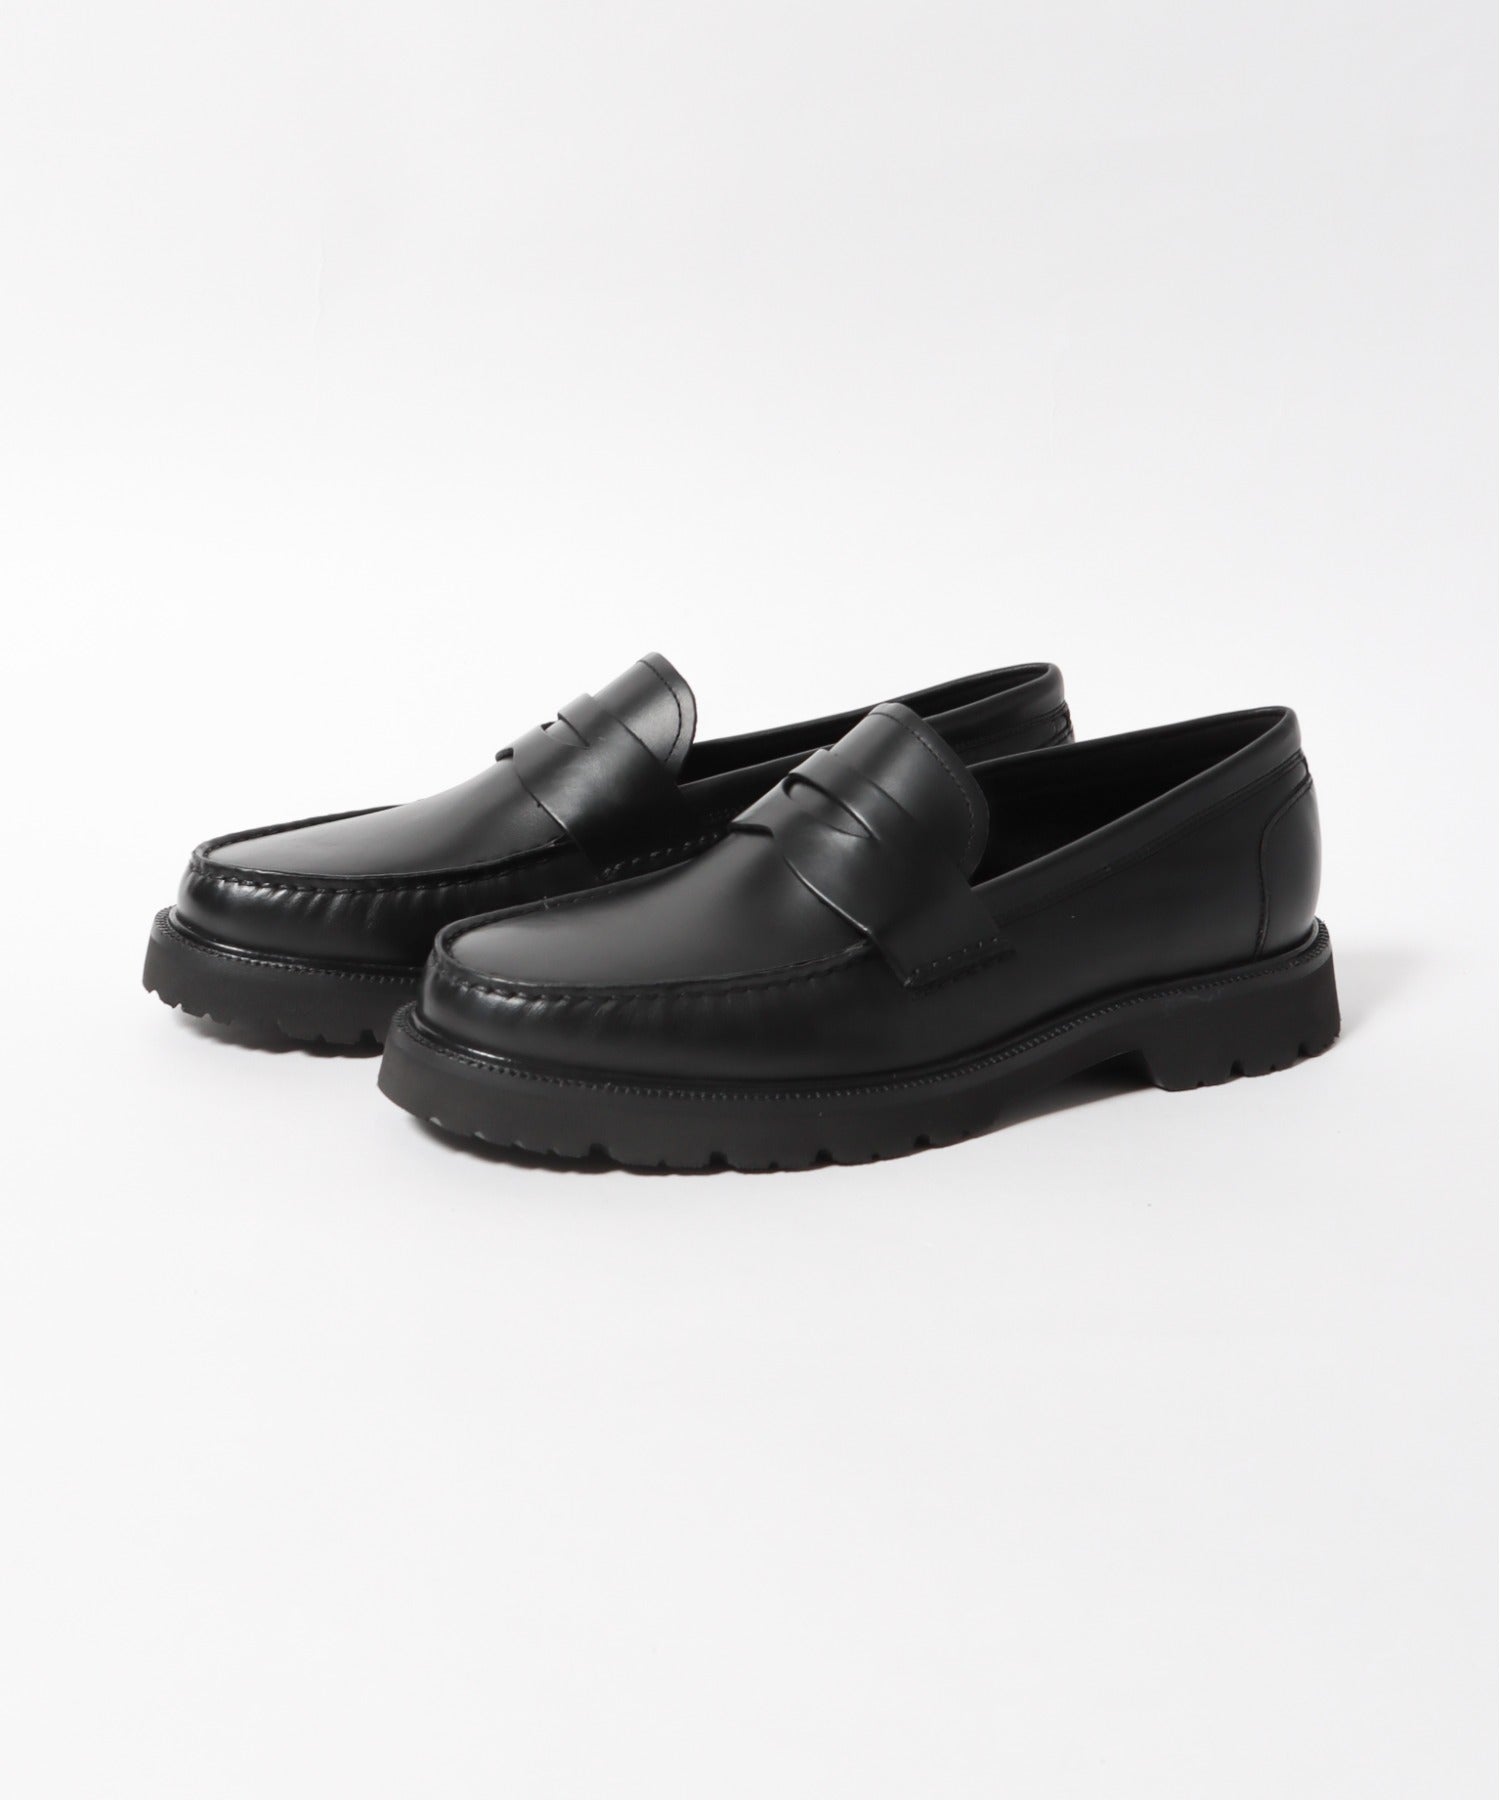 COLE HAAN/コール ハーン AMERICAN CLASSICS PENNY LOAFER